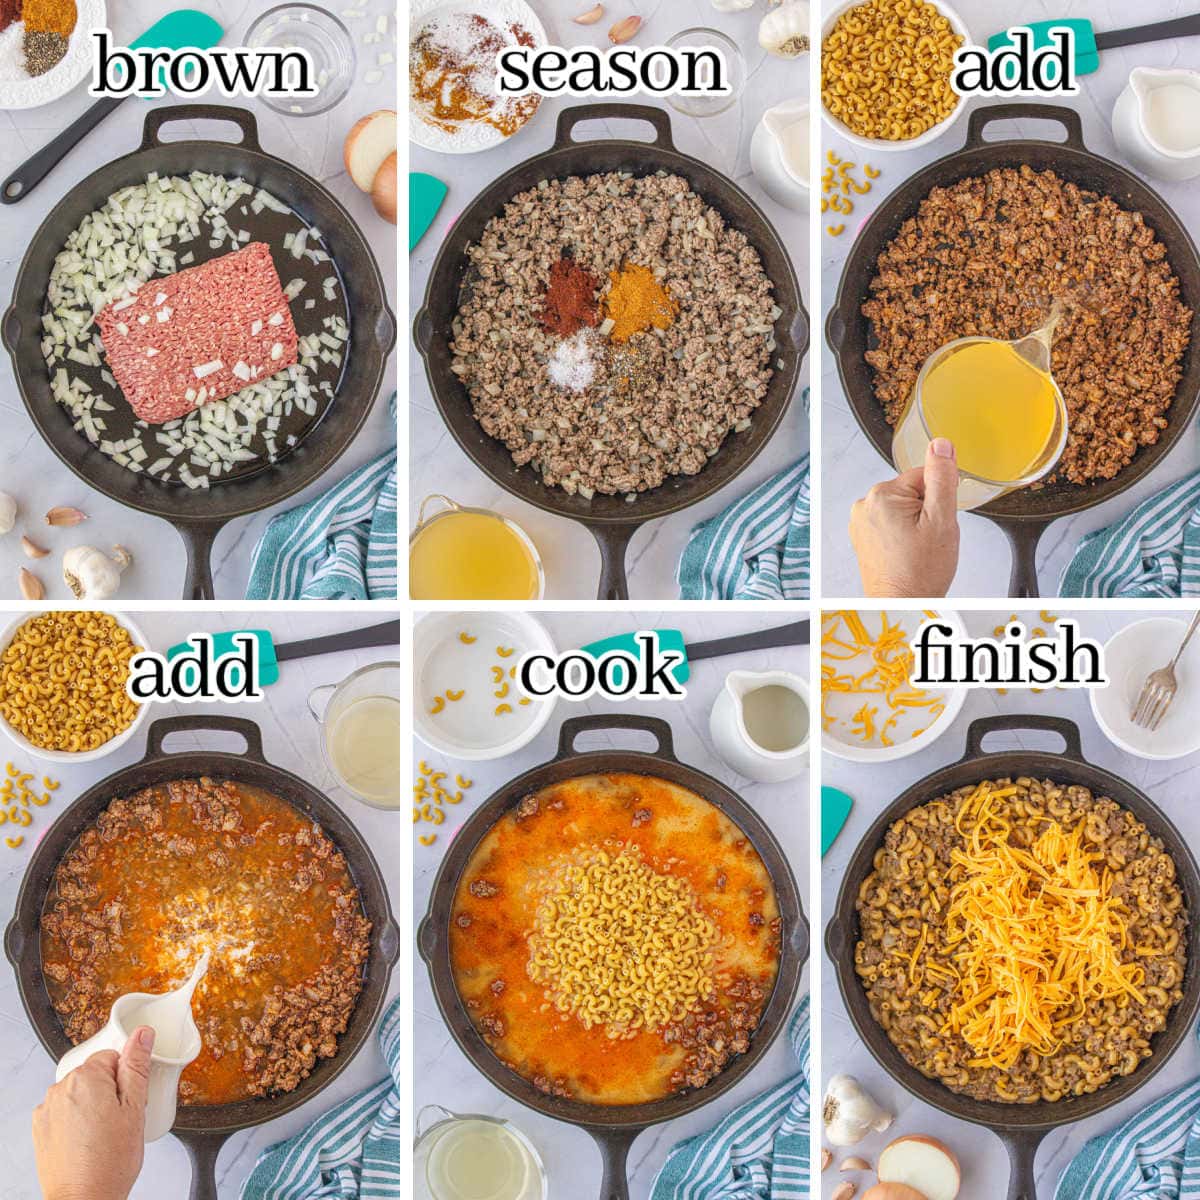 Step-by-step instructions to make the skillet recipe. With print overlay.